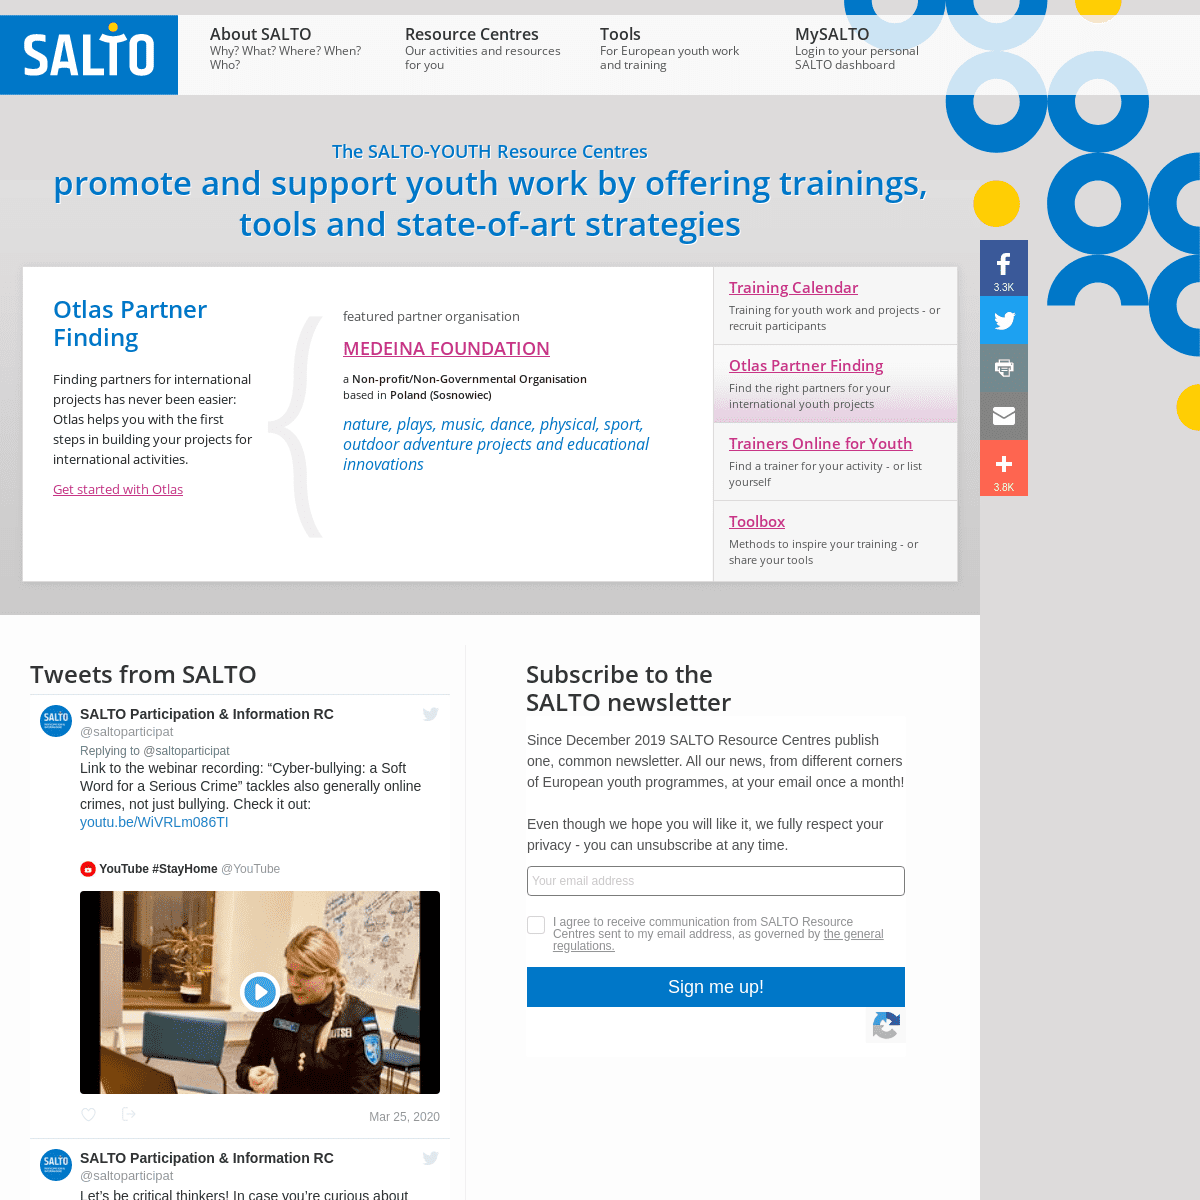 A complete backup of salto-youth.net